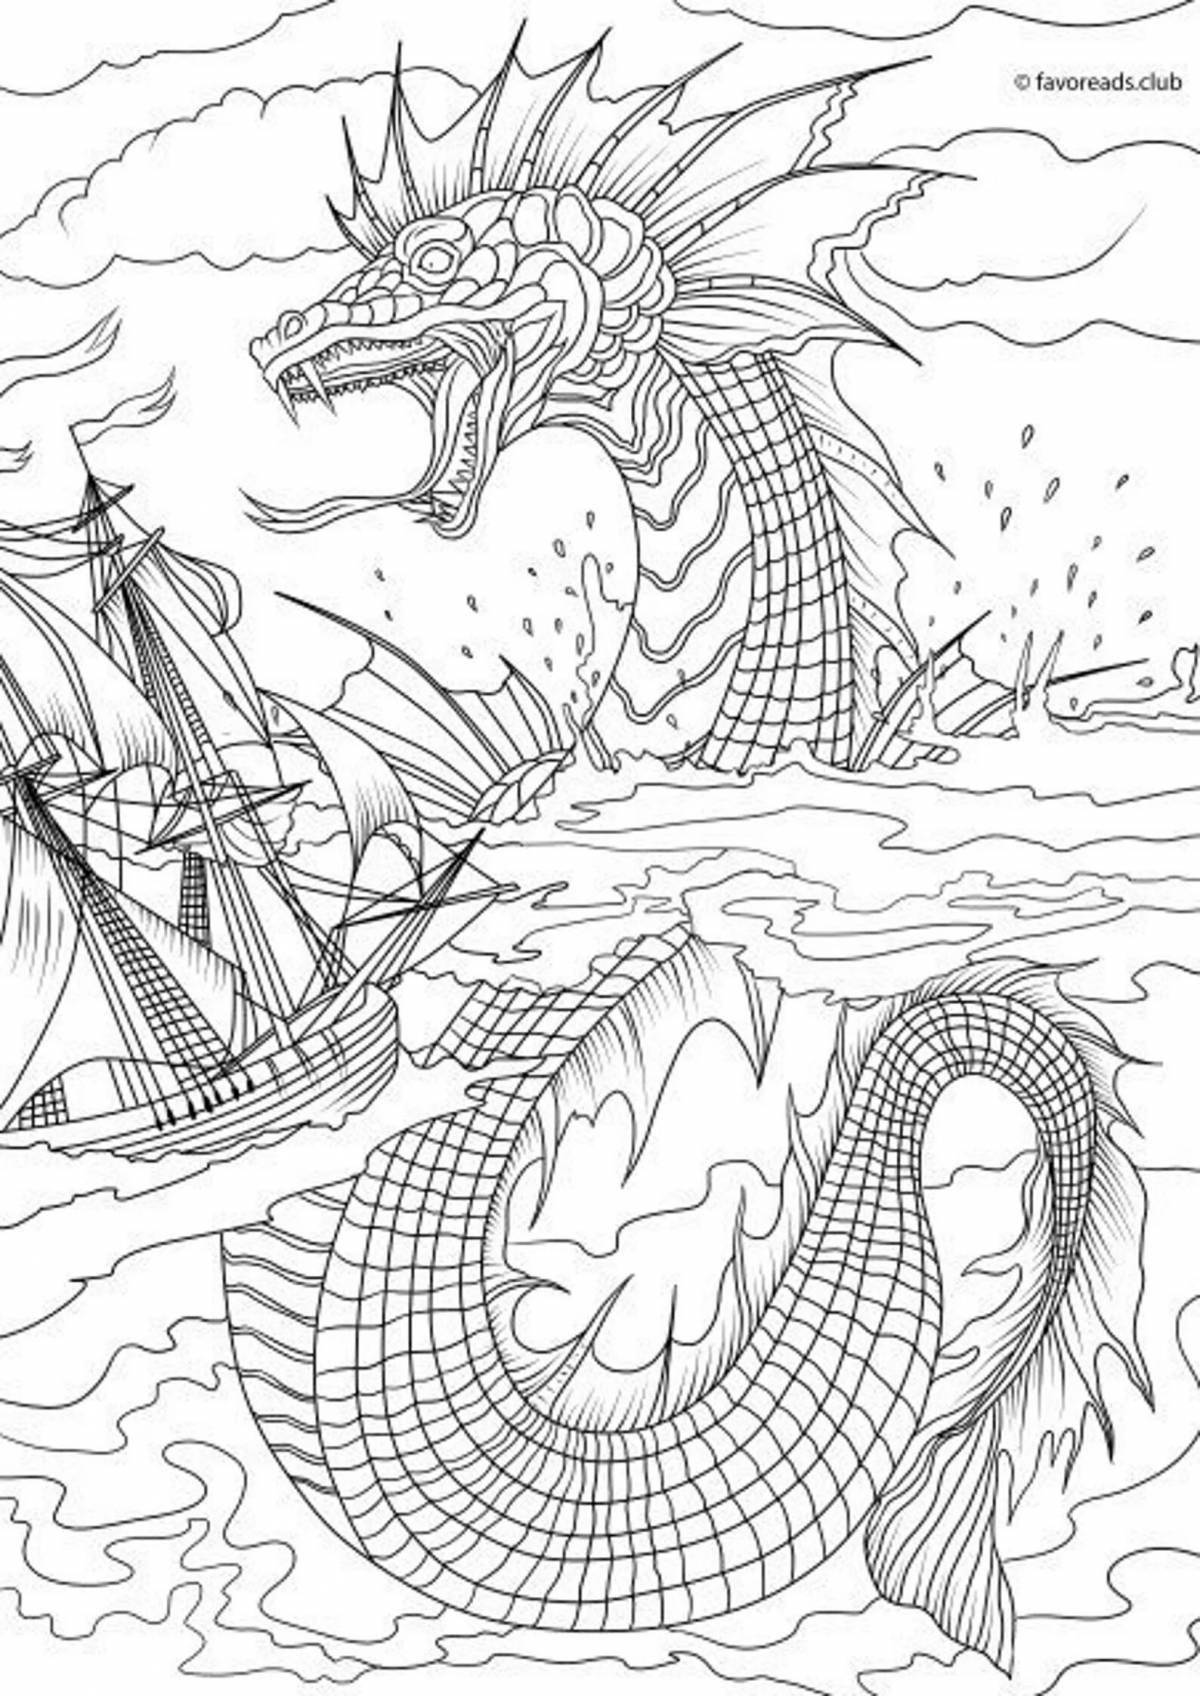 Regal sea monster coloring page